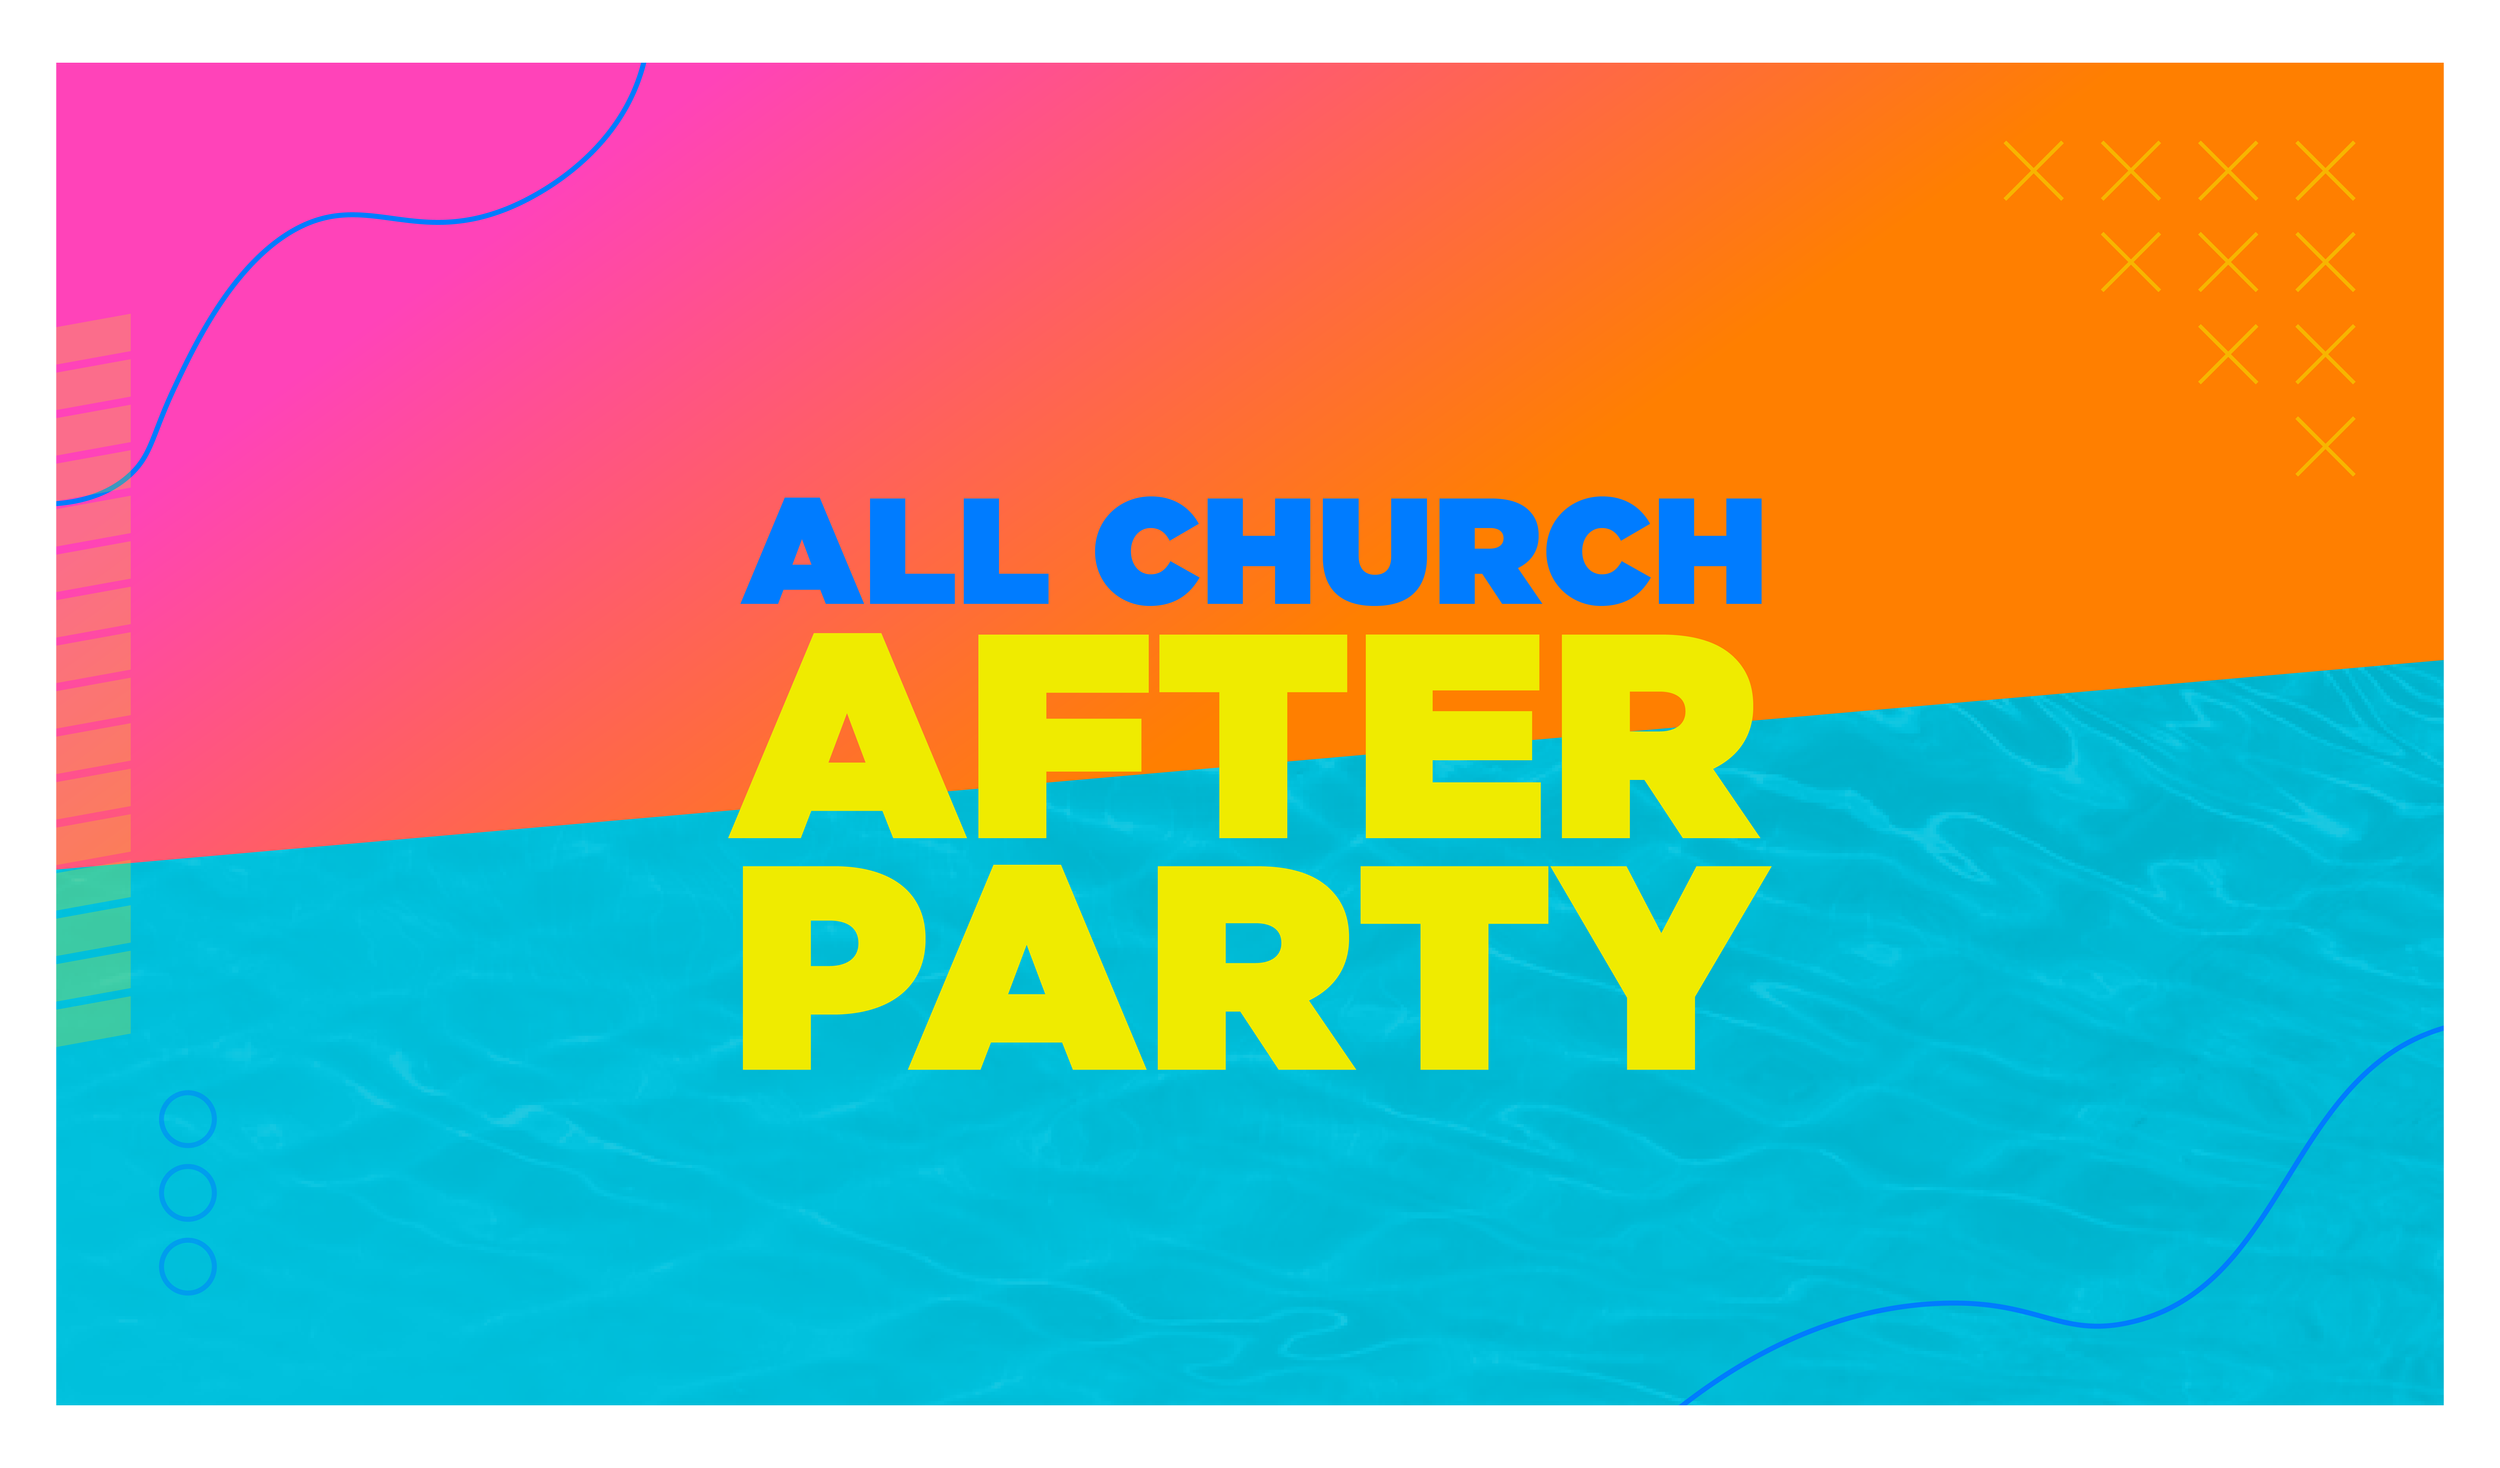 z_Previews_All Church After Party_Title.png